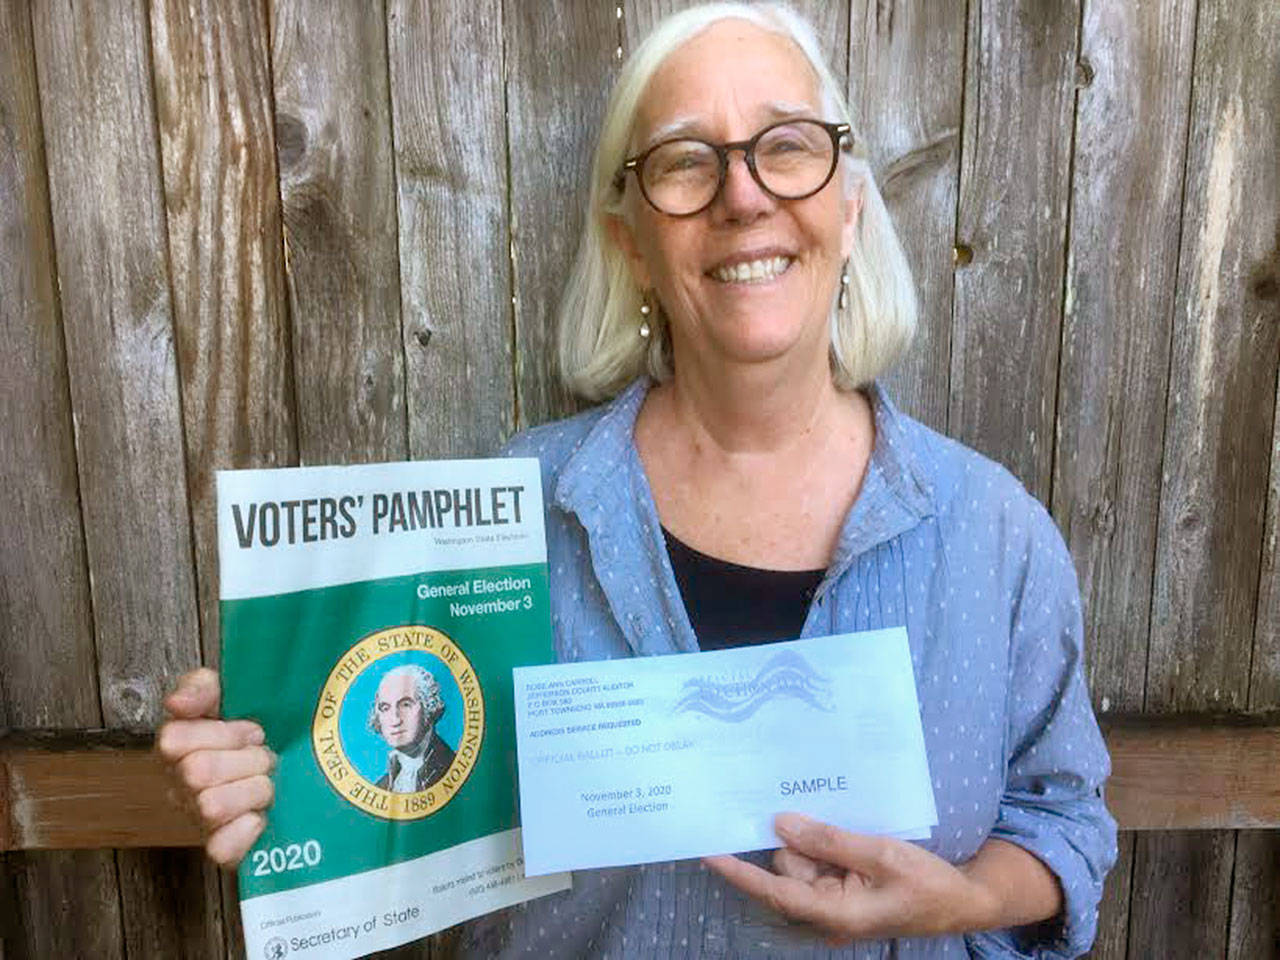 Janette Force, executive director of the Port Townsend Film Festival, holds a sample ballot and a state-produced Voters’ Pamphlet. (Submitted photo)